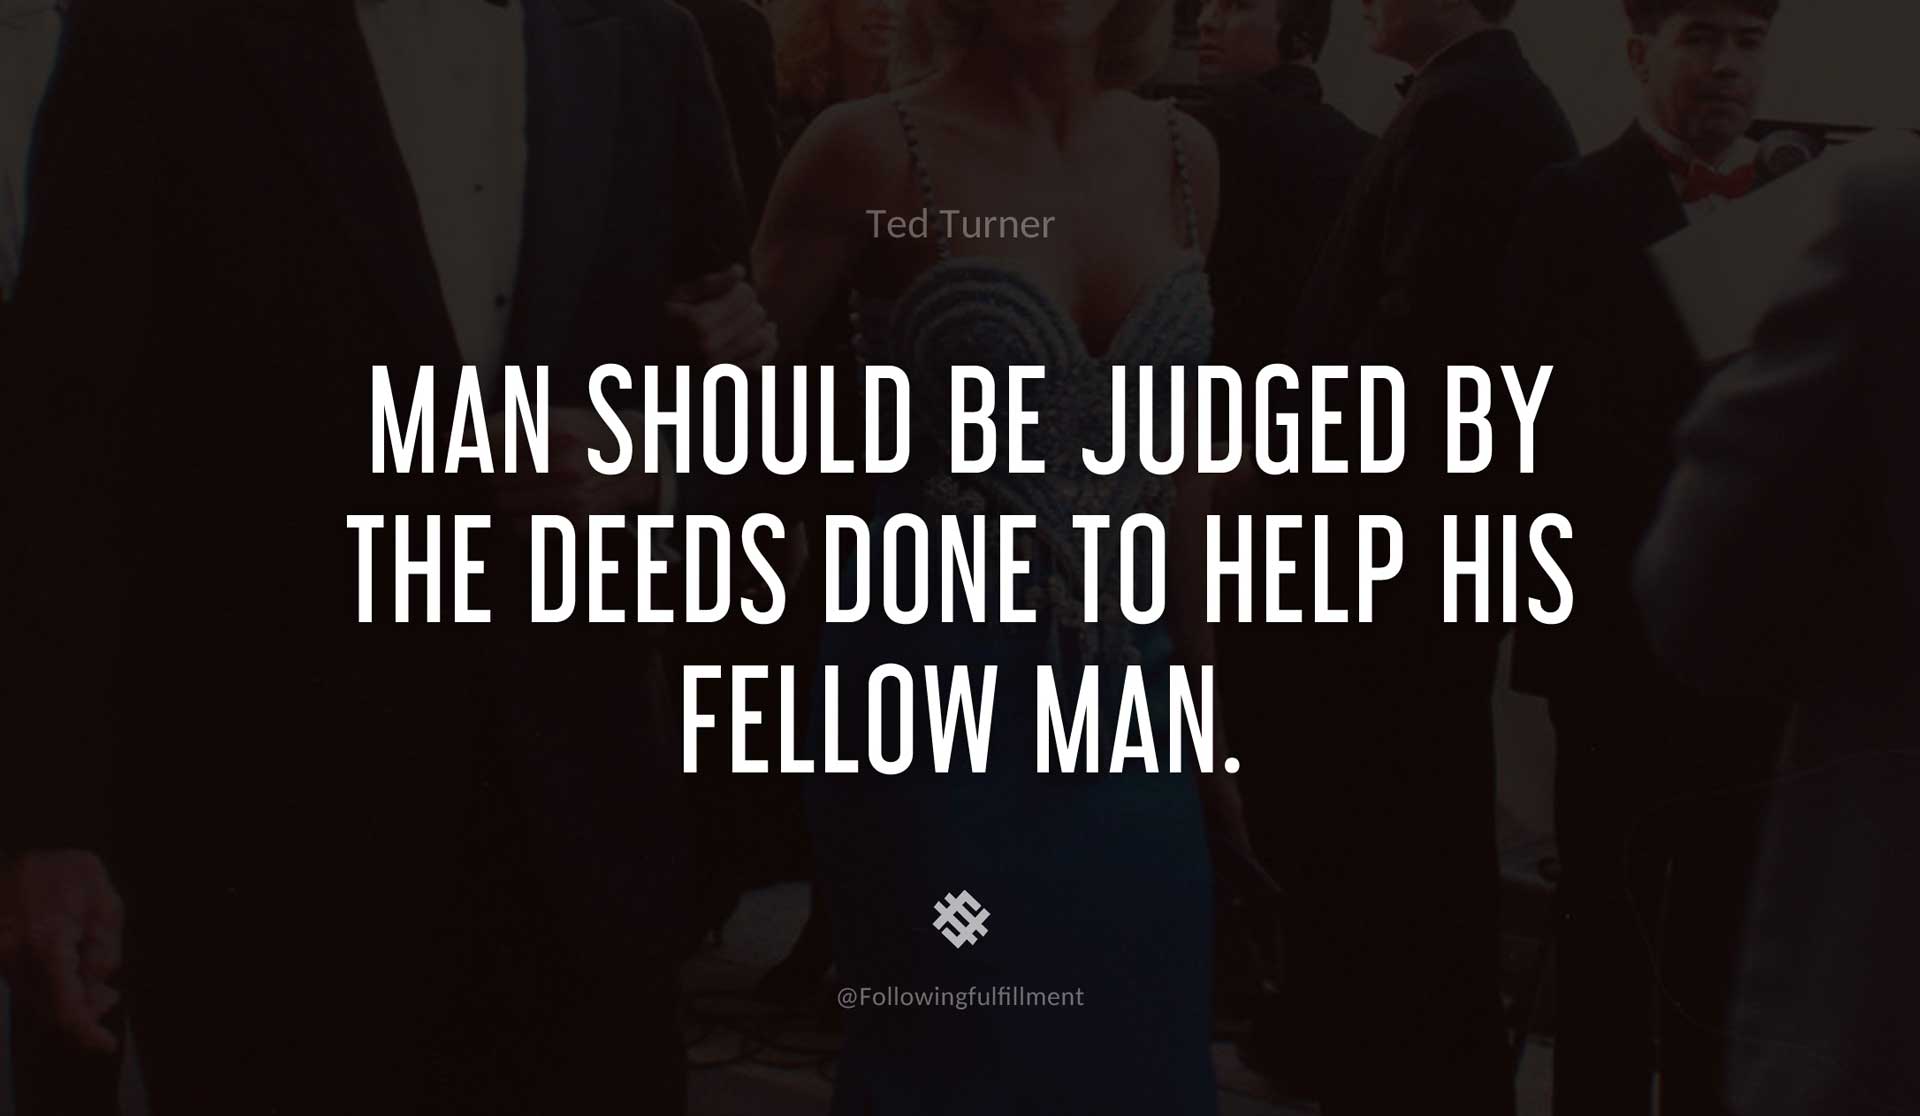 Man-should-be-judged-by-the-deeds-done-to-help-his-fellow-man.-TED-TURNER-Quote.jpg